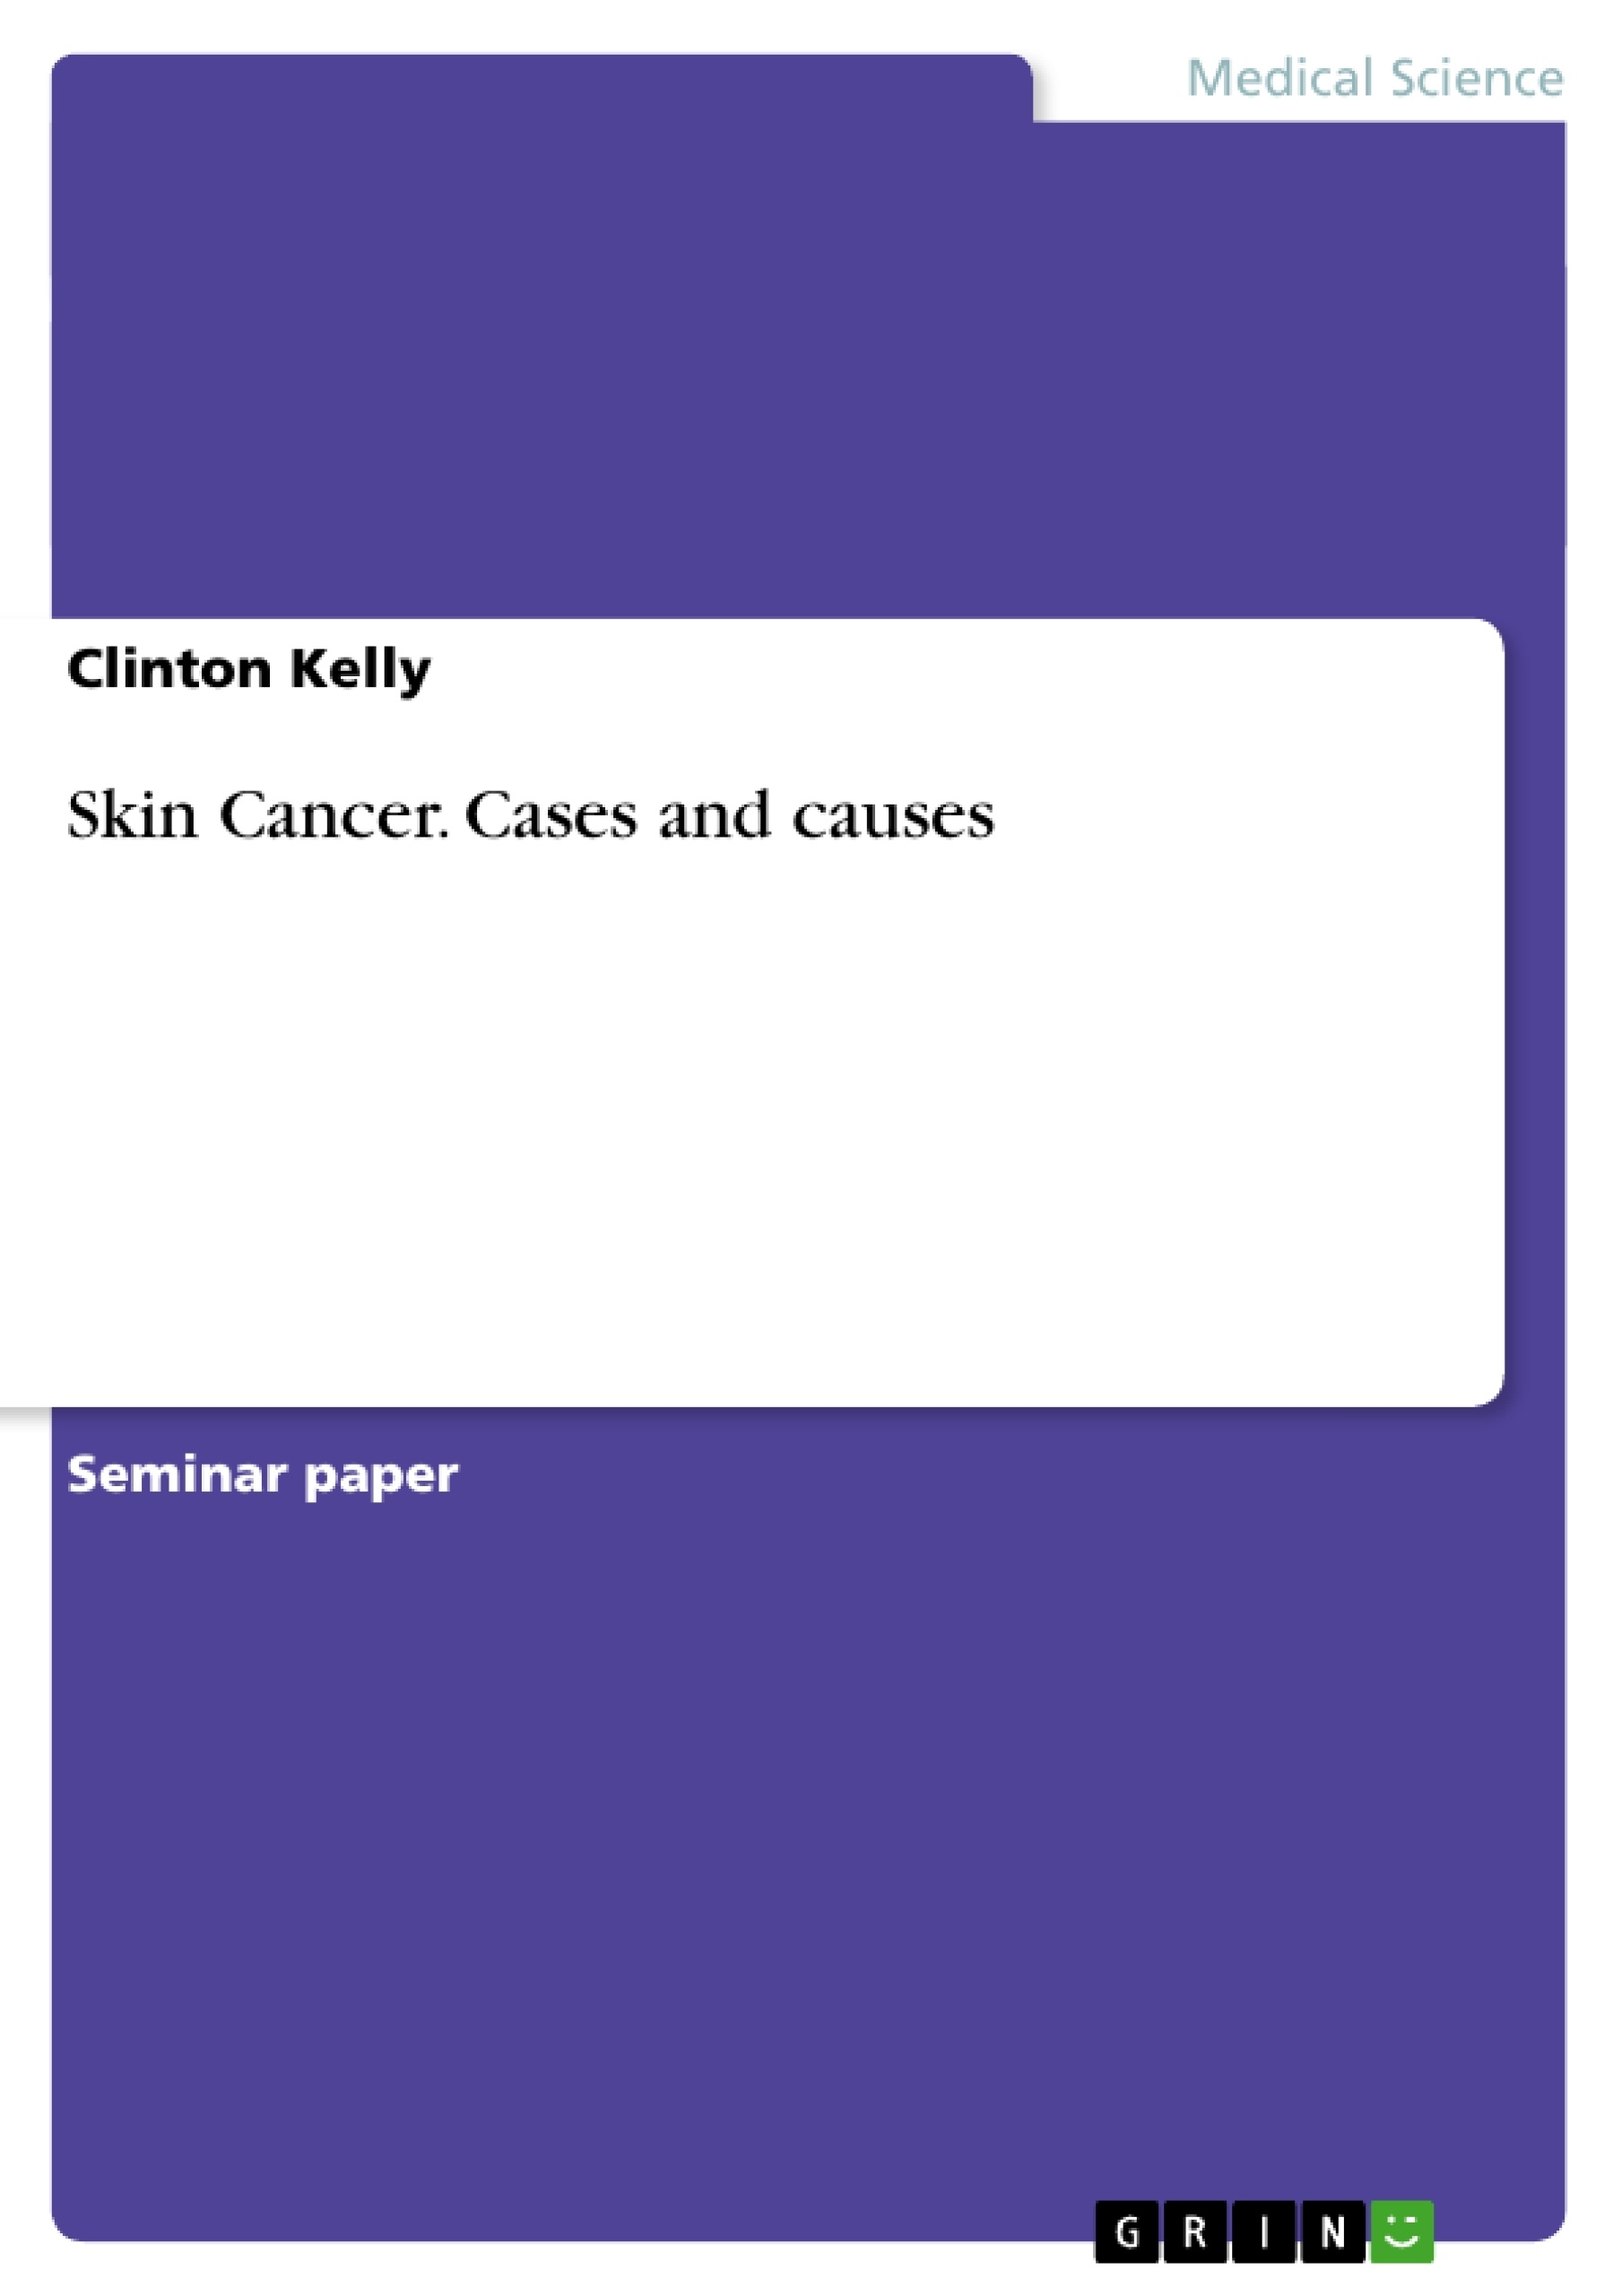 Title: Skin Cancer. Cases and causes